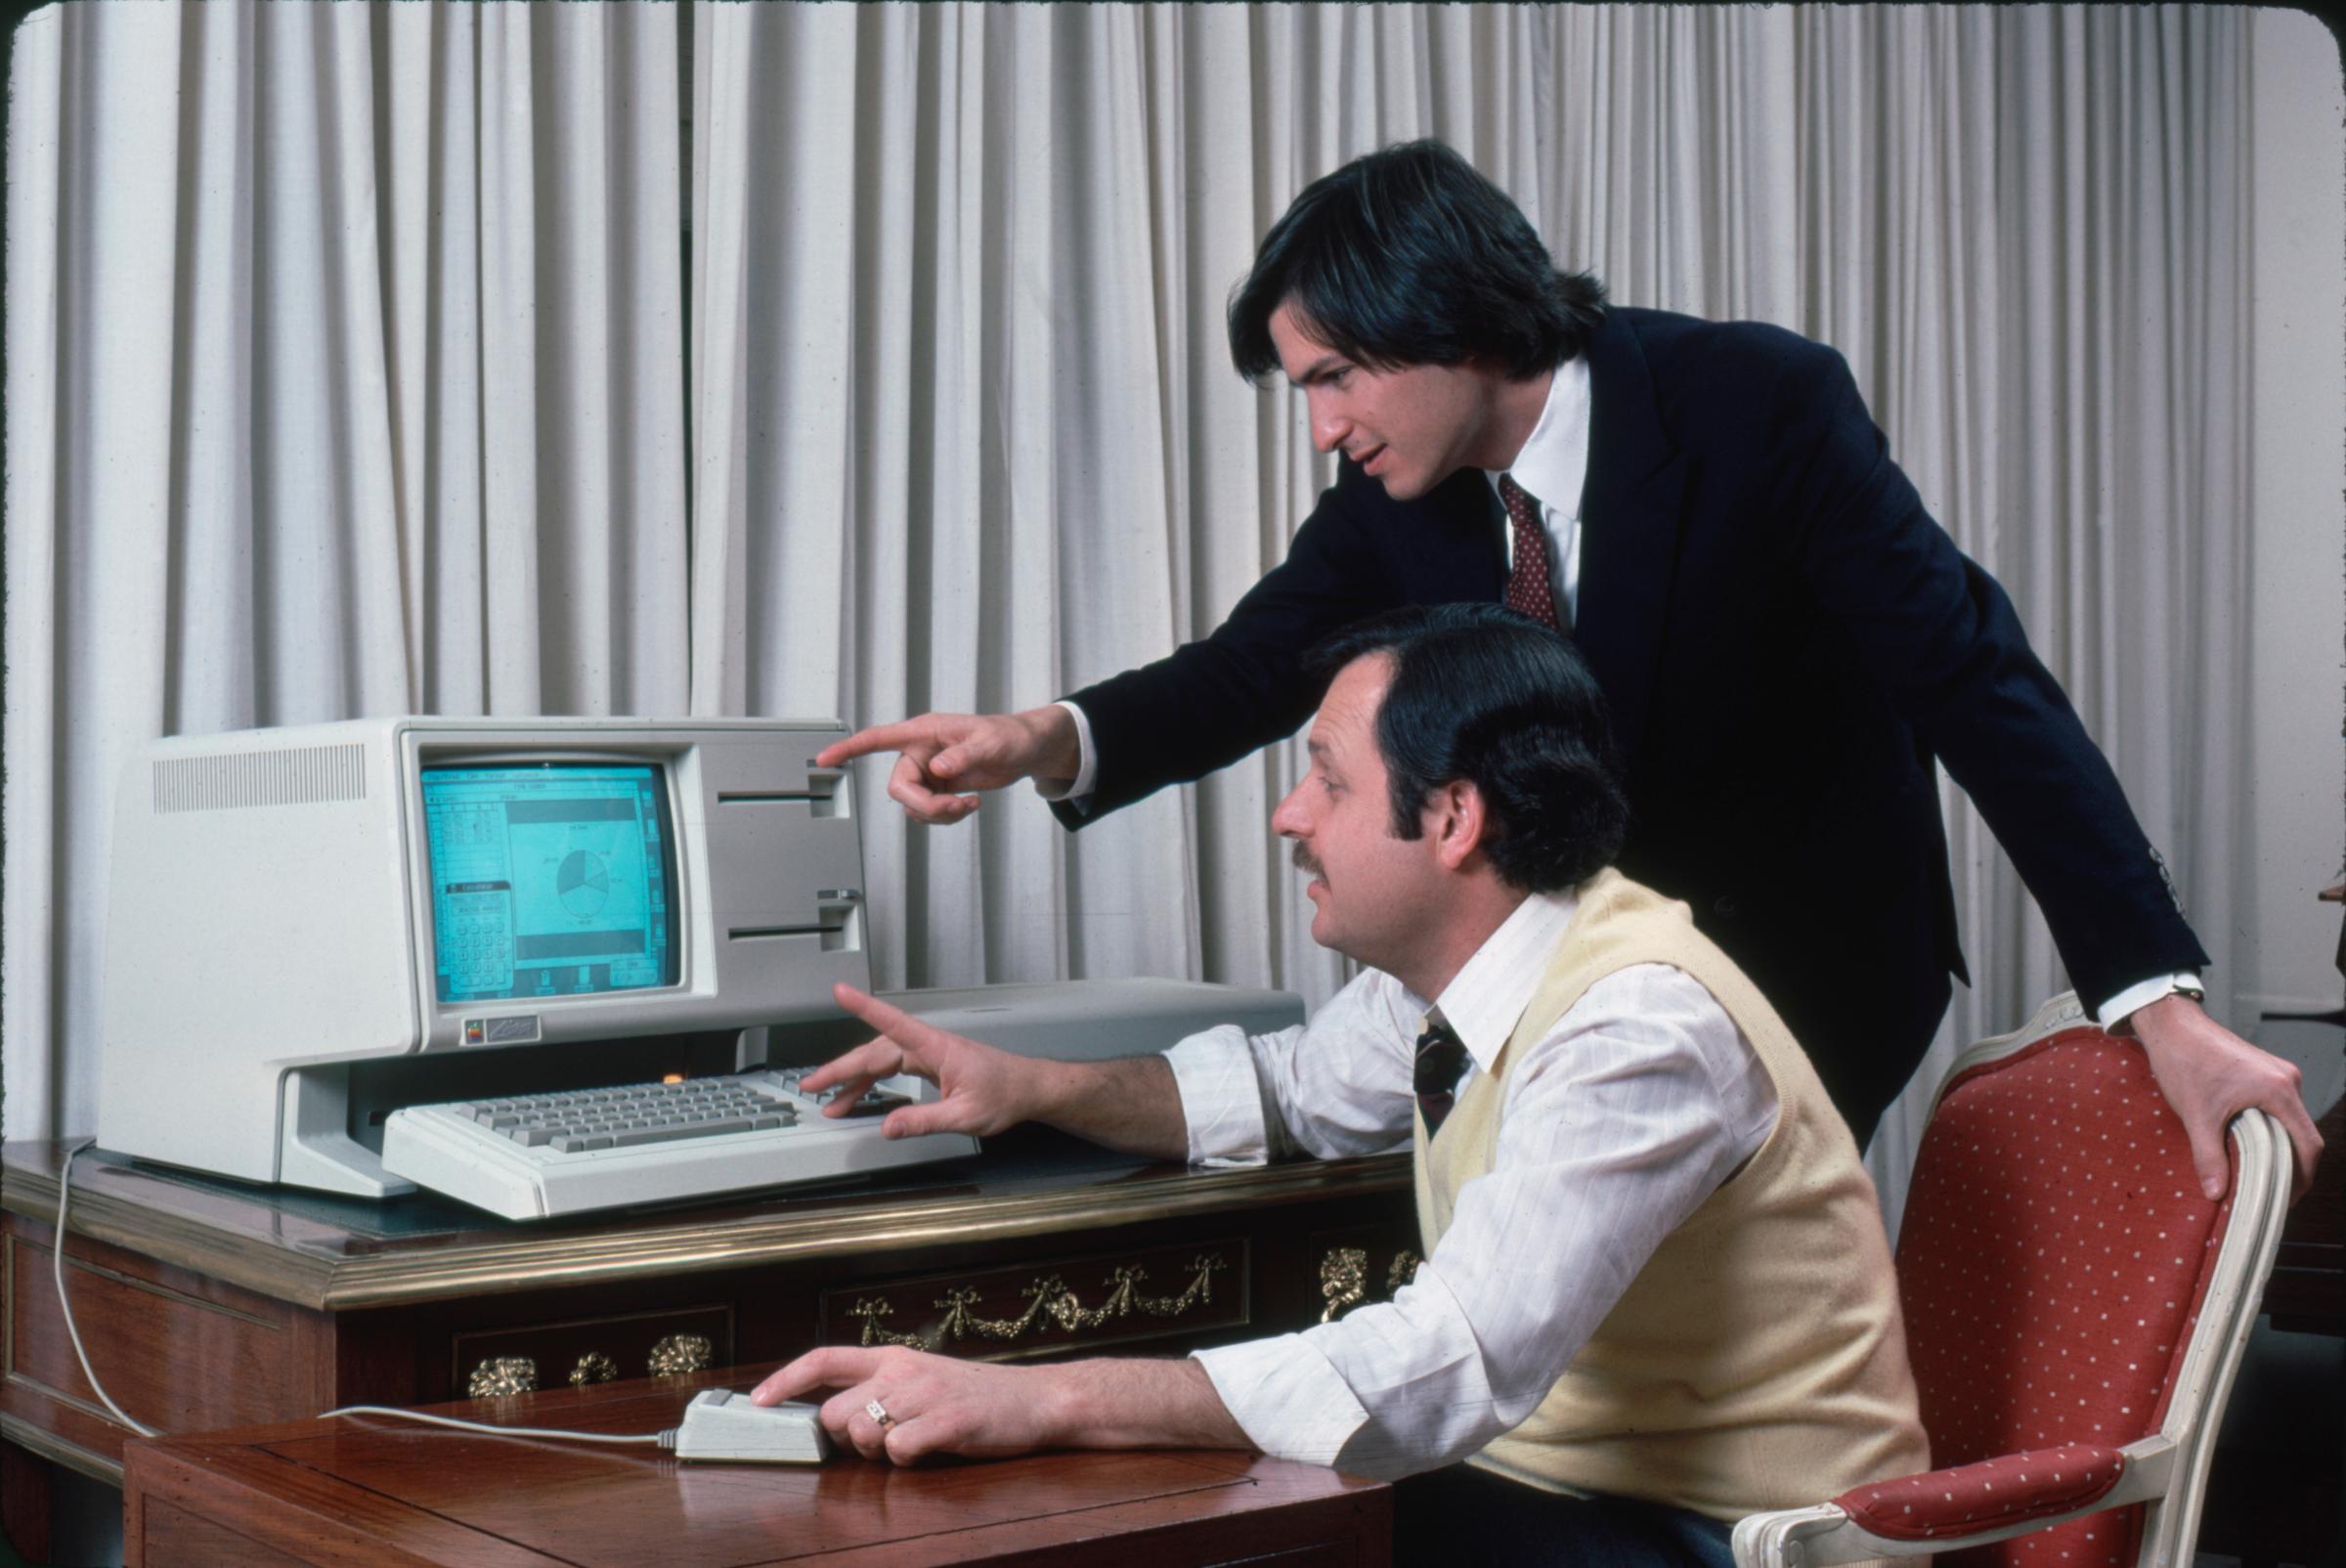 Apple computer Chrmn. Steve Jobs (R) and technician w. new LISA computer during press preview.